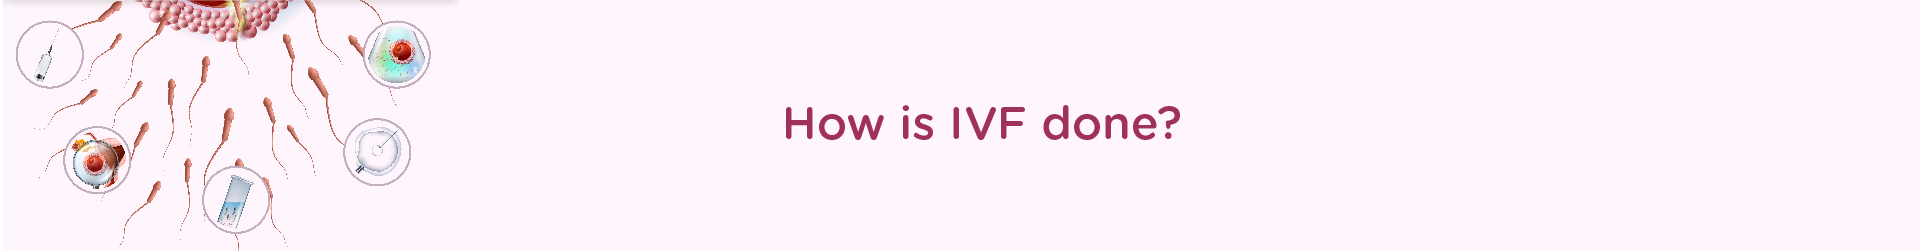 How is IVF done?